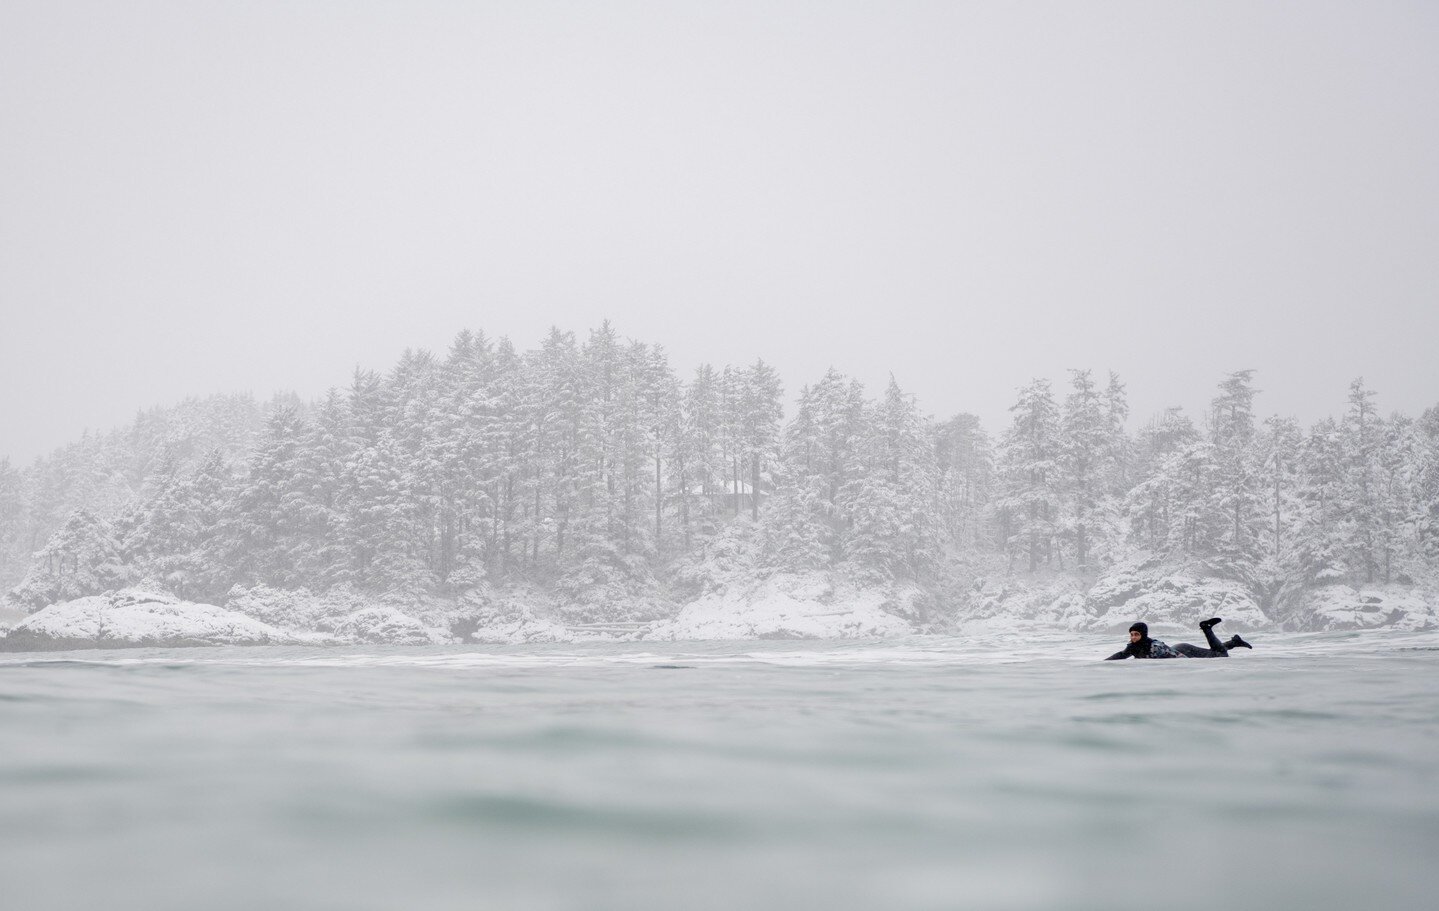 Happy Holidays from us here at Surfrider Canada!⁠
❄️⁠
From the West to East Coast, we are excited to have you as a part of our team. Enjoy this festive season! ⁠
🌊⁠
In need of a last minute present? Gift a friend or family member a Surfrider members